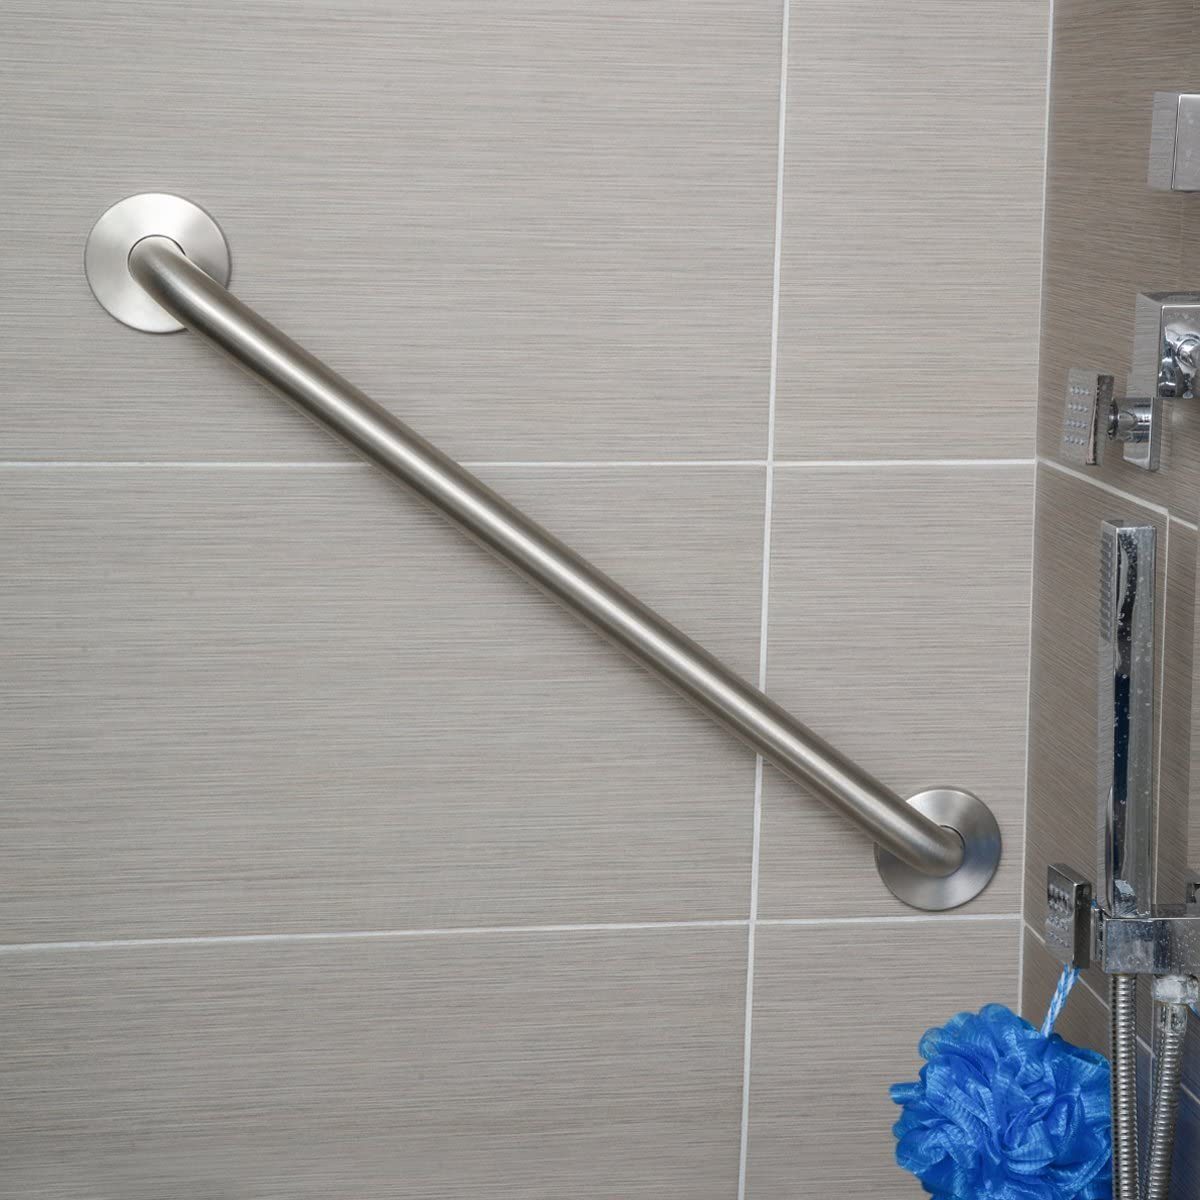 These Photos Will Convince You Every Shower Should Have a Seat